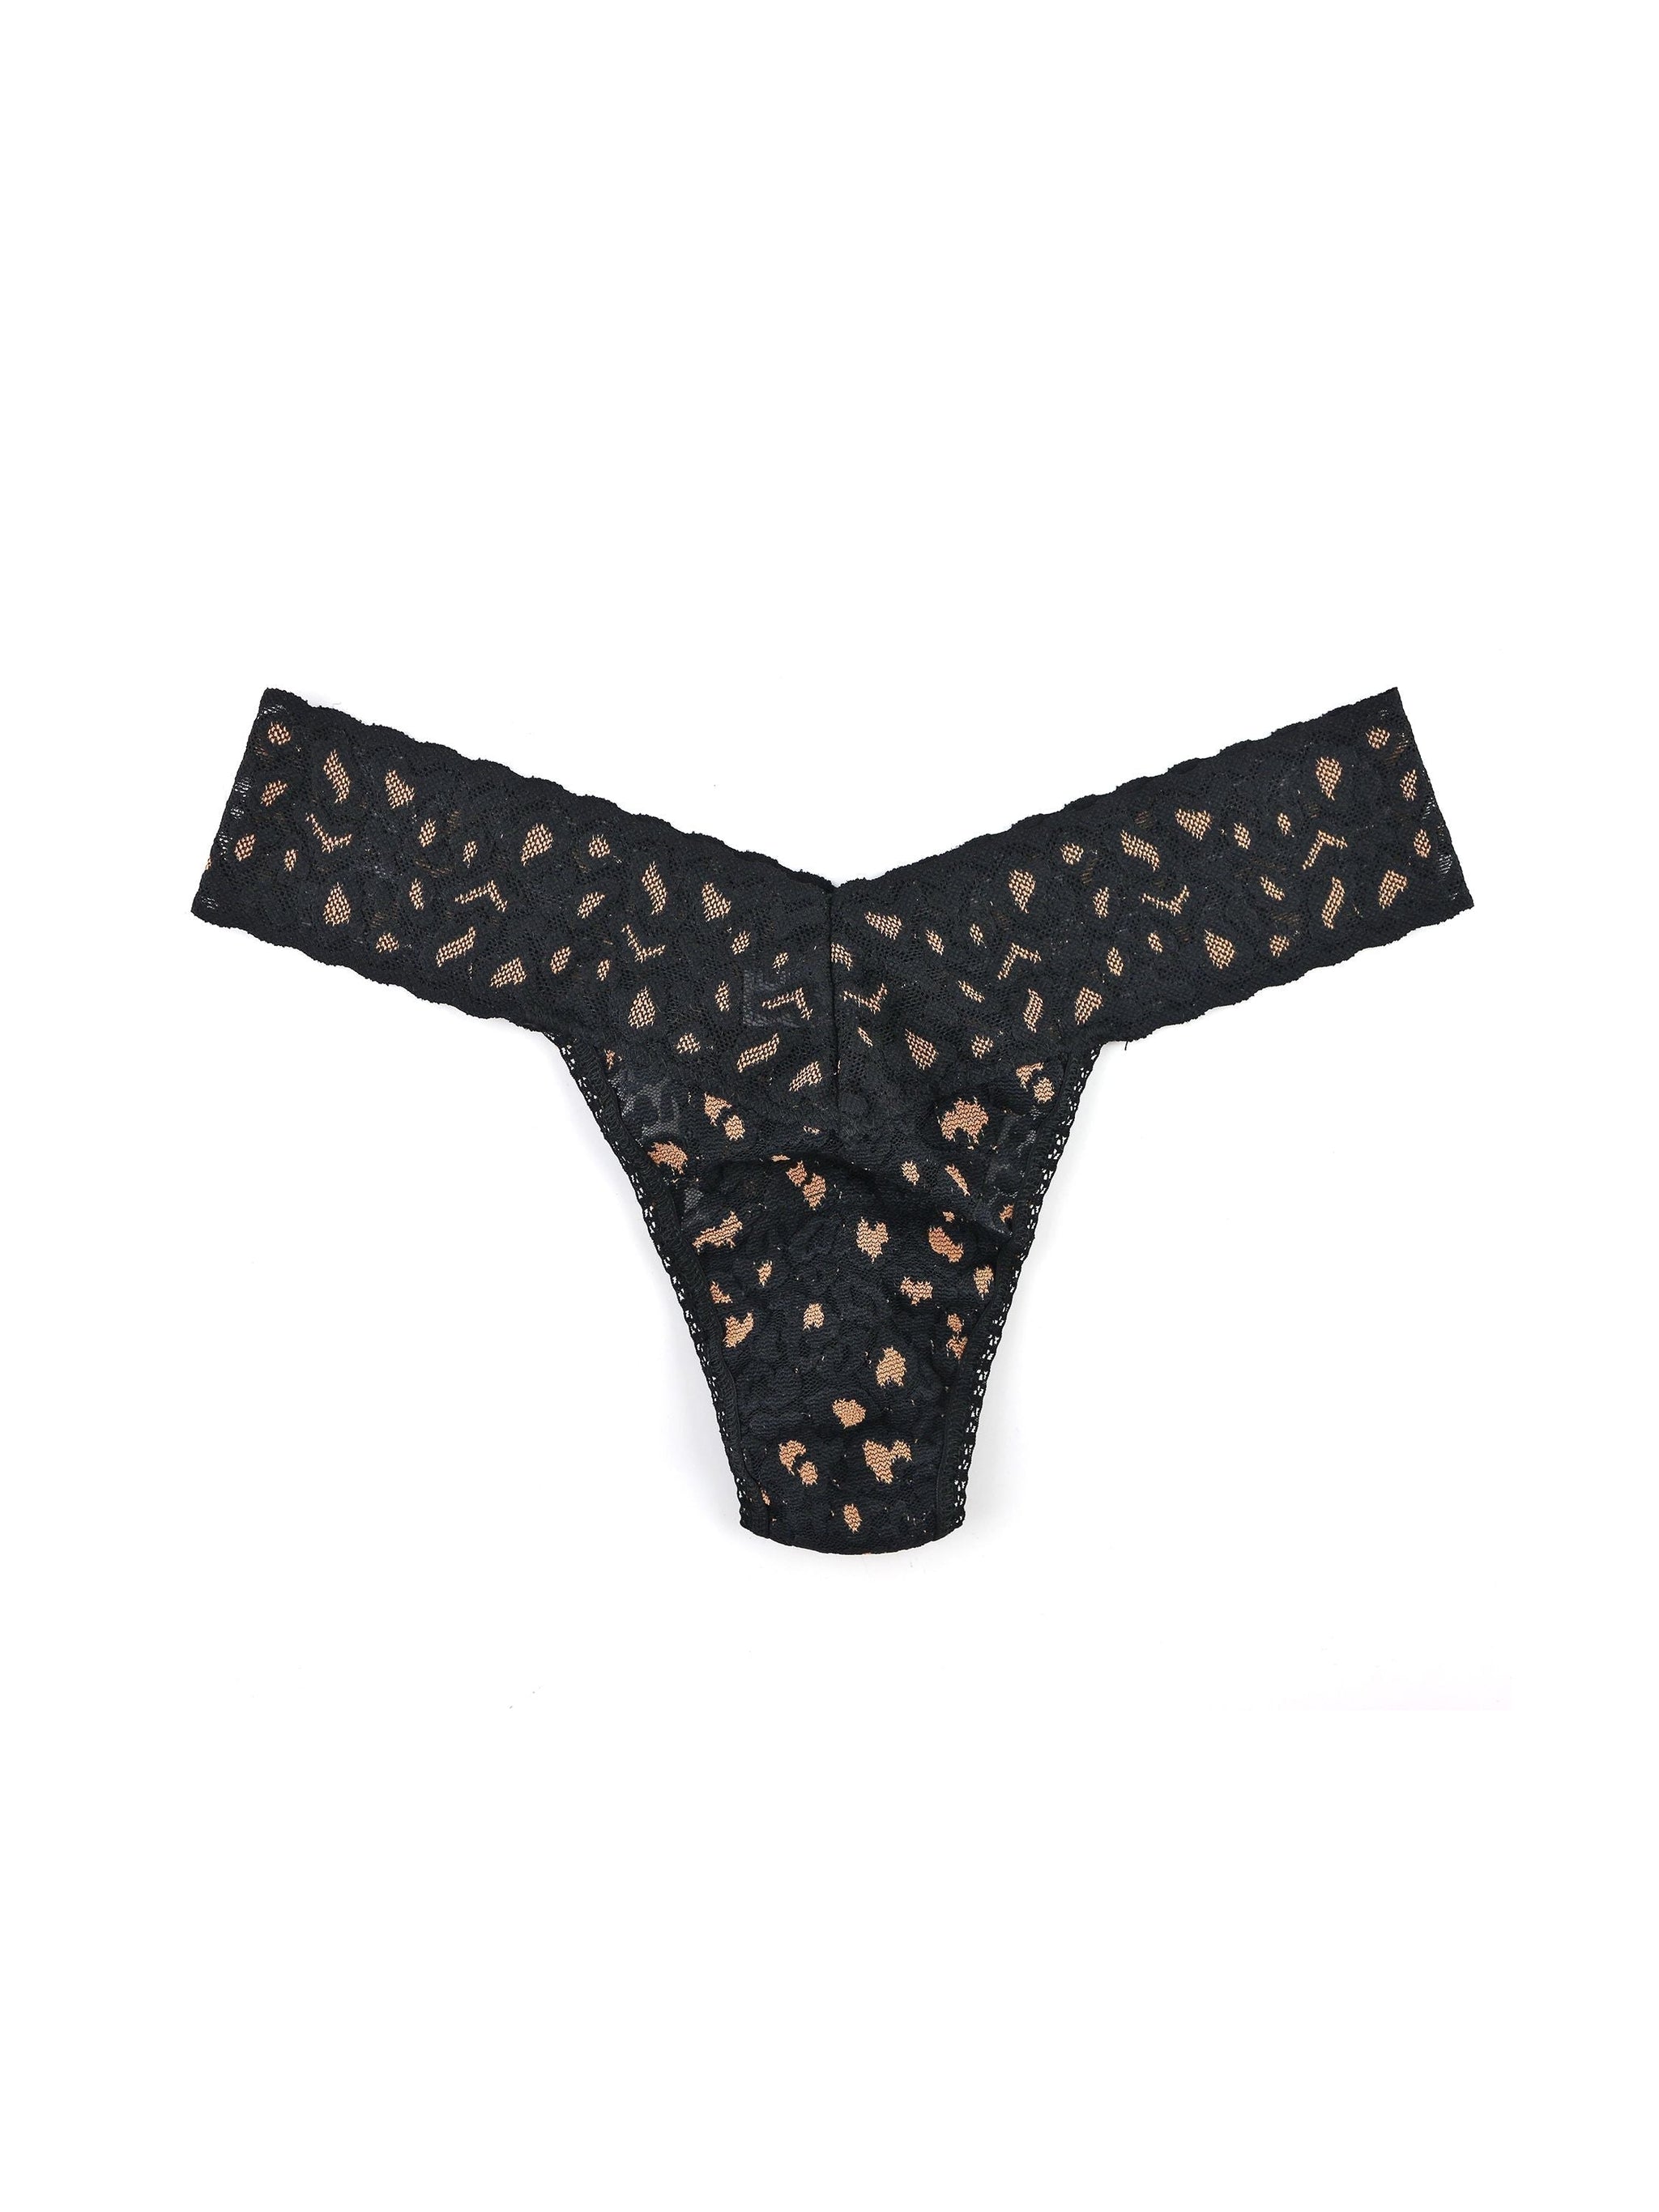  Hanky Panky Petite Size Low Rise Thong Panty- Black One Size  (Fits 0-4) : Clothing, Shoes & Jewelry